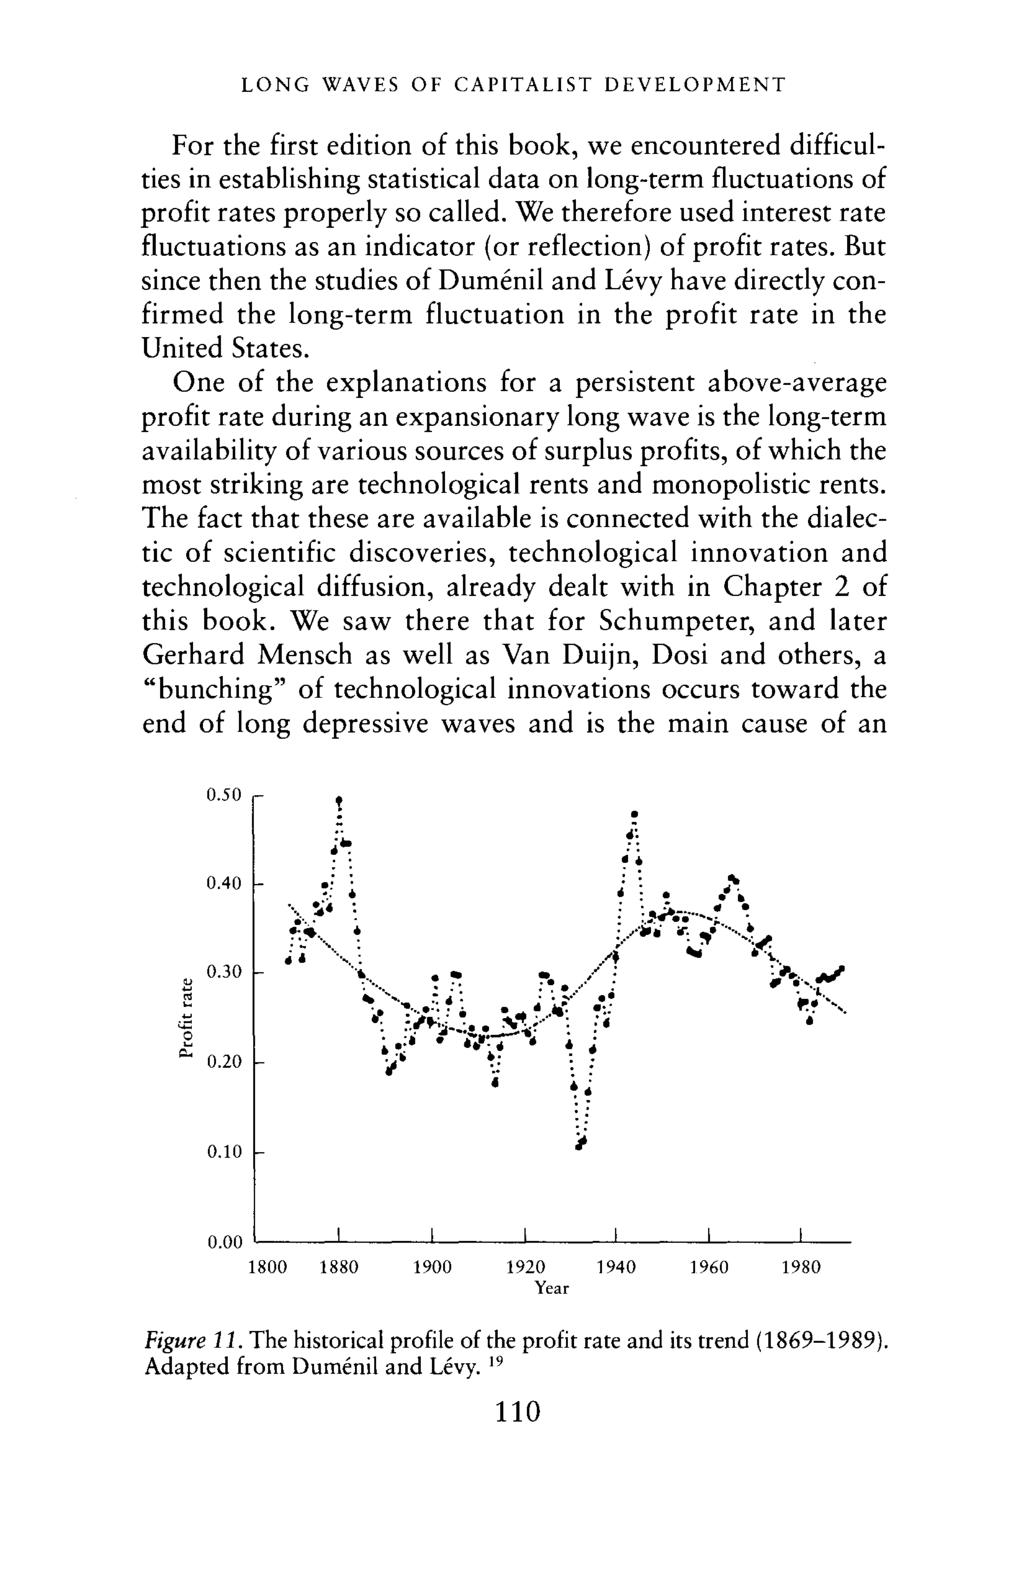 LONG WAVES OF CAPITALIST DEVELOPMENT For the first edition of this book, we encountered difficulties in establishing statistical data on long-term fluctuations of profit rates properly so called.